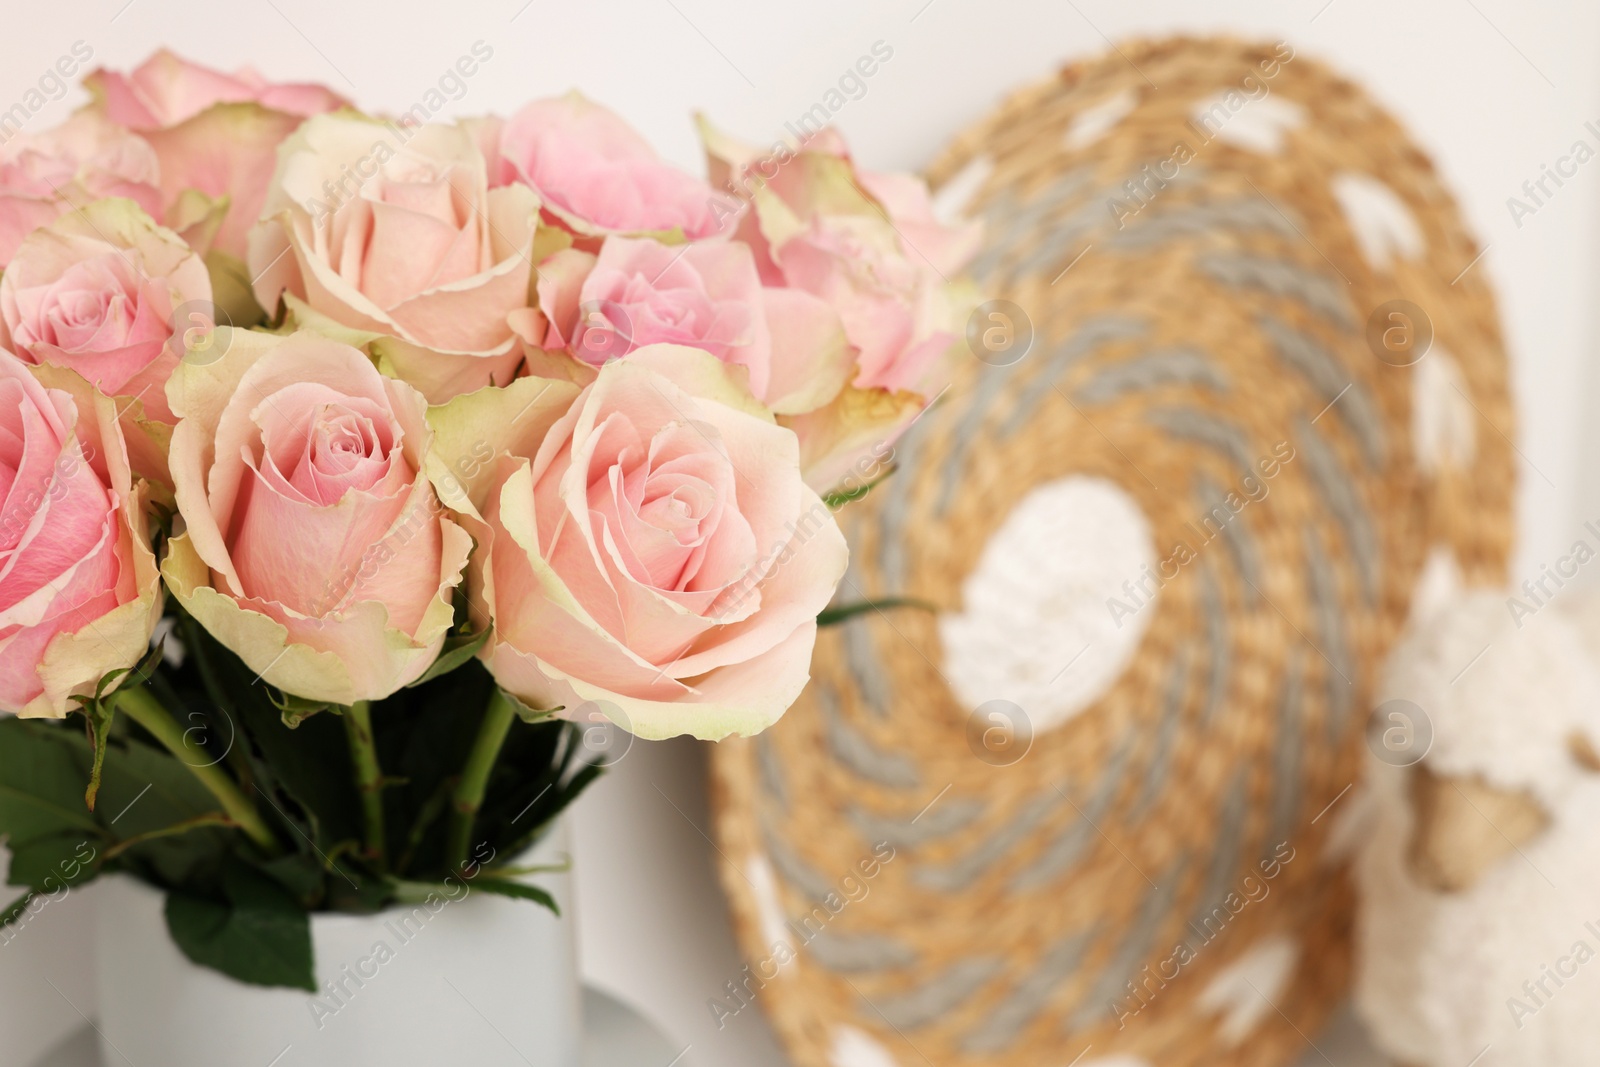 Photo of Beautiful rose flowers and decor, closeup with space for text. Interior design